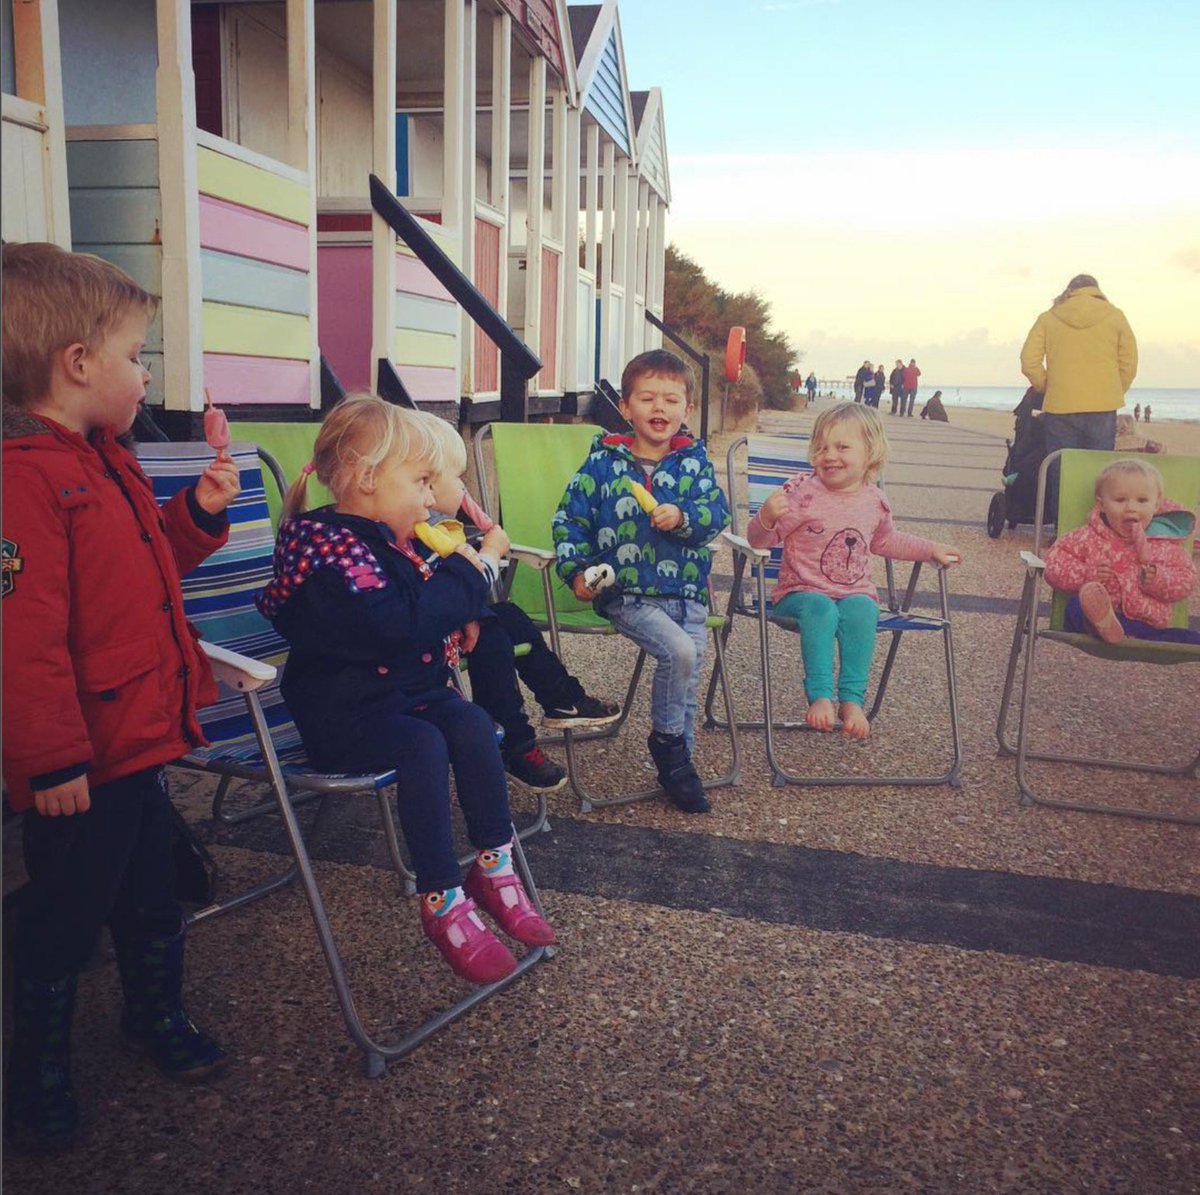 The perfect way to celebrate turning 3! #icelollies #wintersun #southwold #suffolk